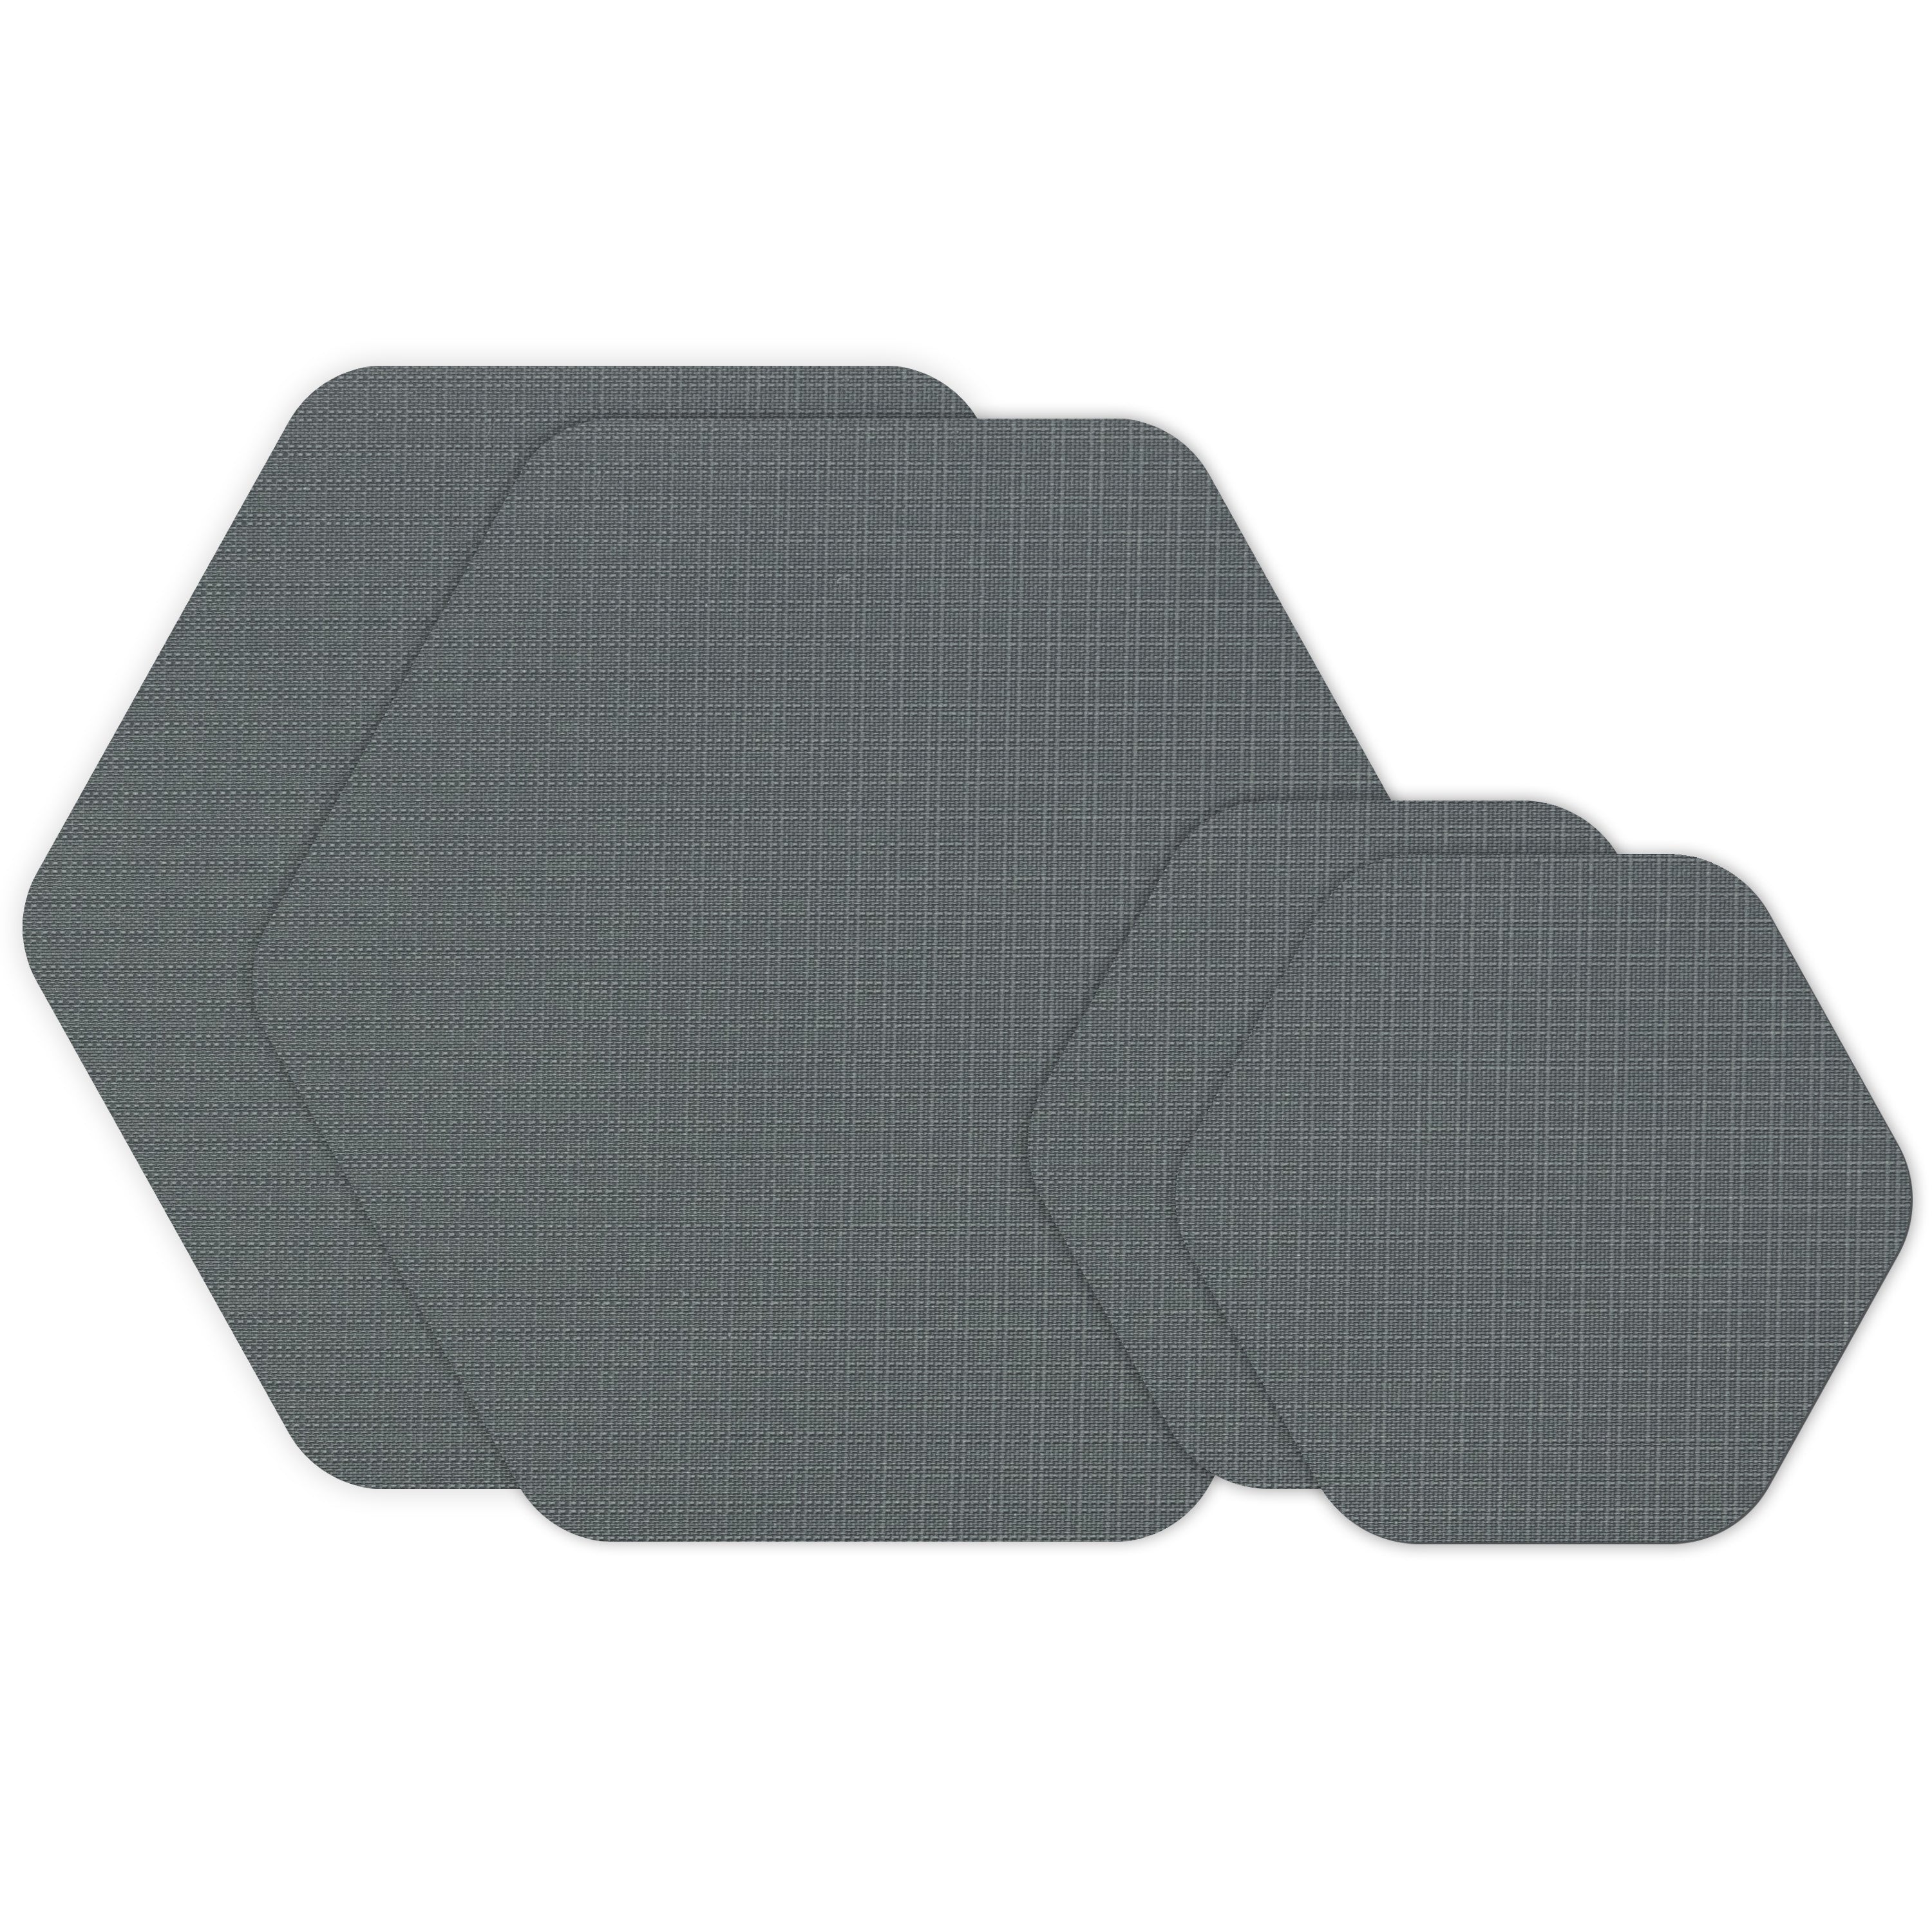 Gear Aid Mcn10710 Tenacious Tape Repair Patches for sale online